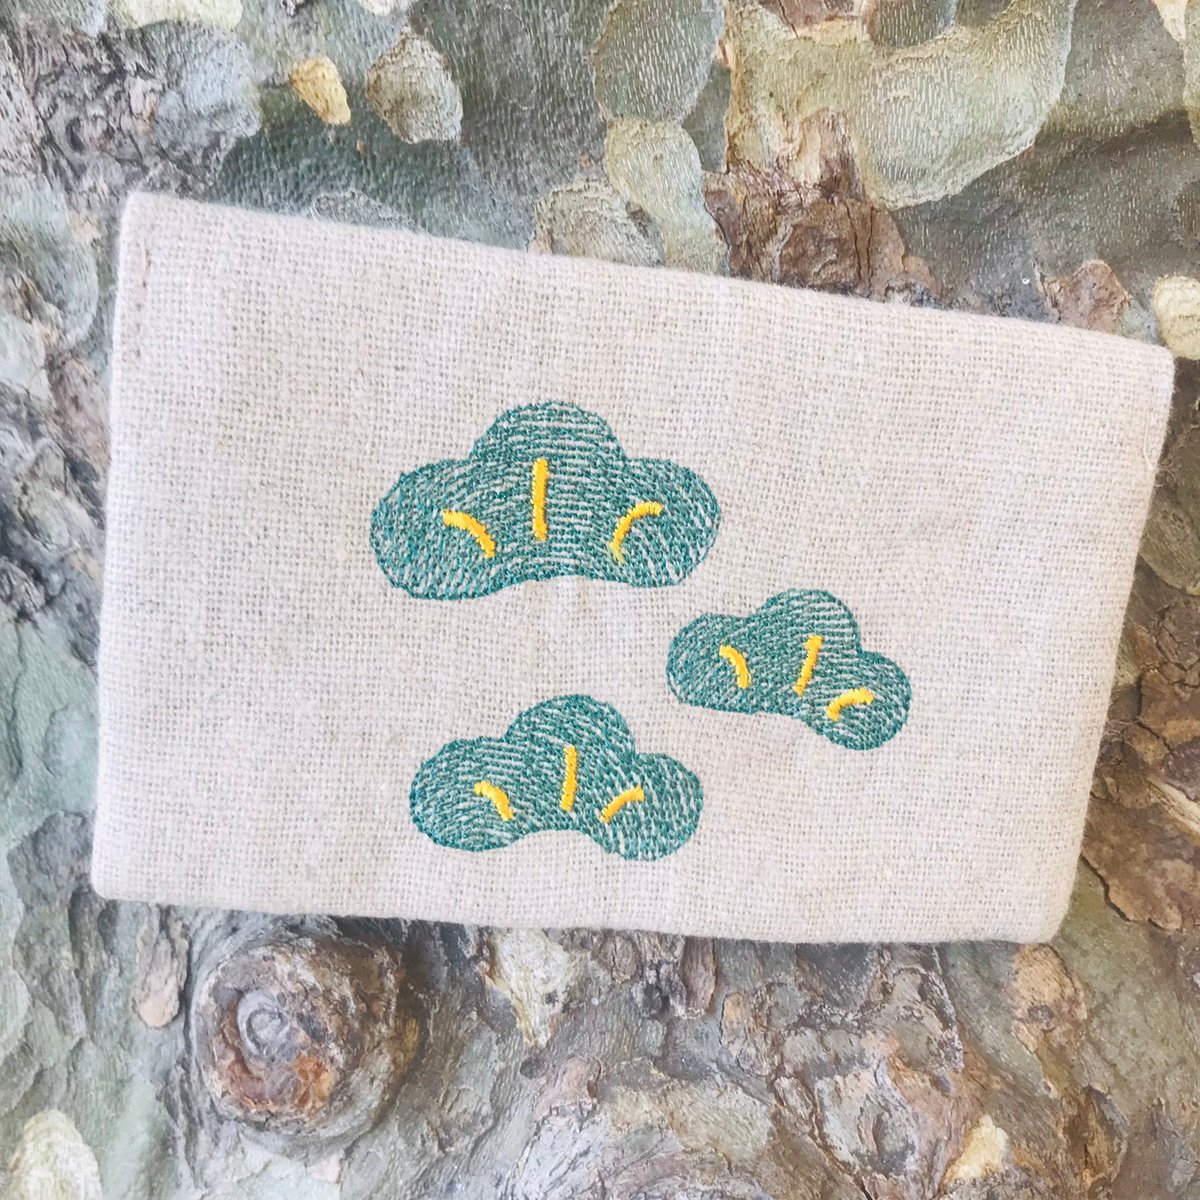 Excited to share the latest addition to my #etsy shop: Card Pouch Bonsai Linen etsy.me/3N3943A #beige #green #cardholder #ecoconcernpurse #bagpursewallet #bonsaidesign #greenconcern #sustainableliving #madeinfrance #beigeaesthetic